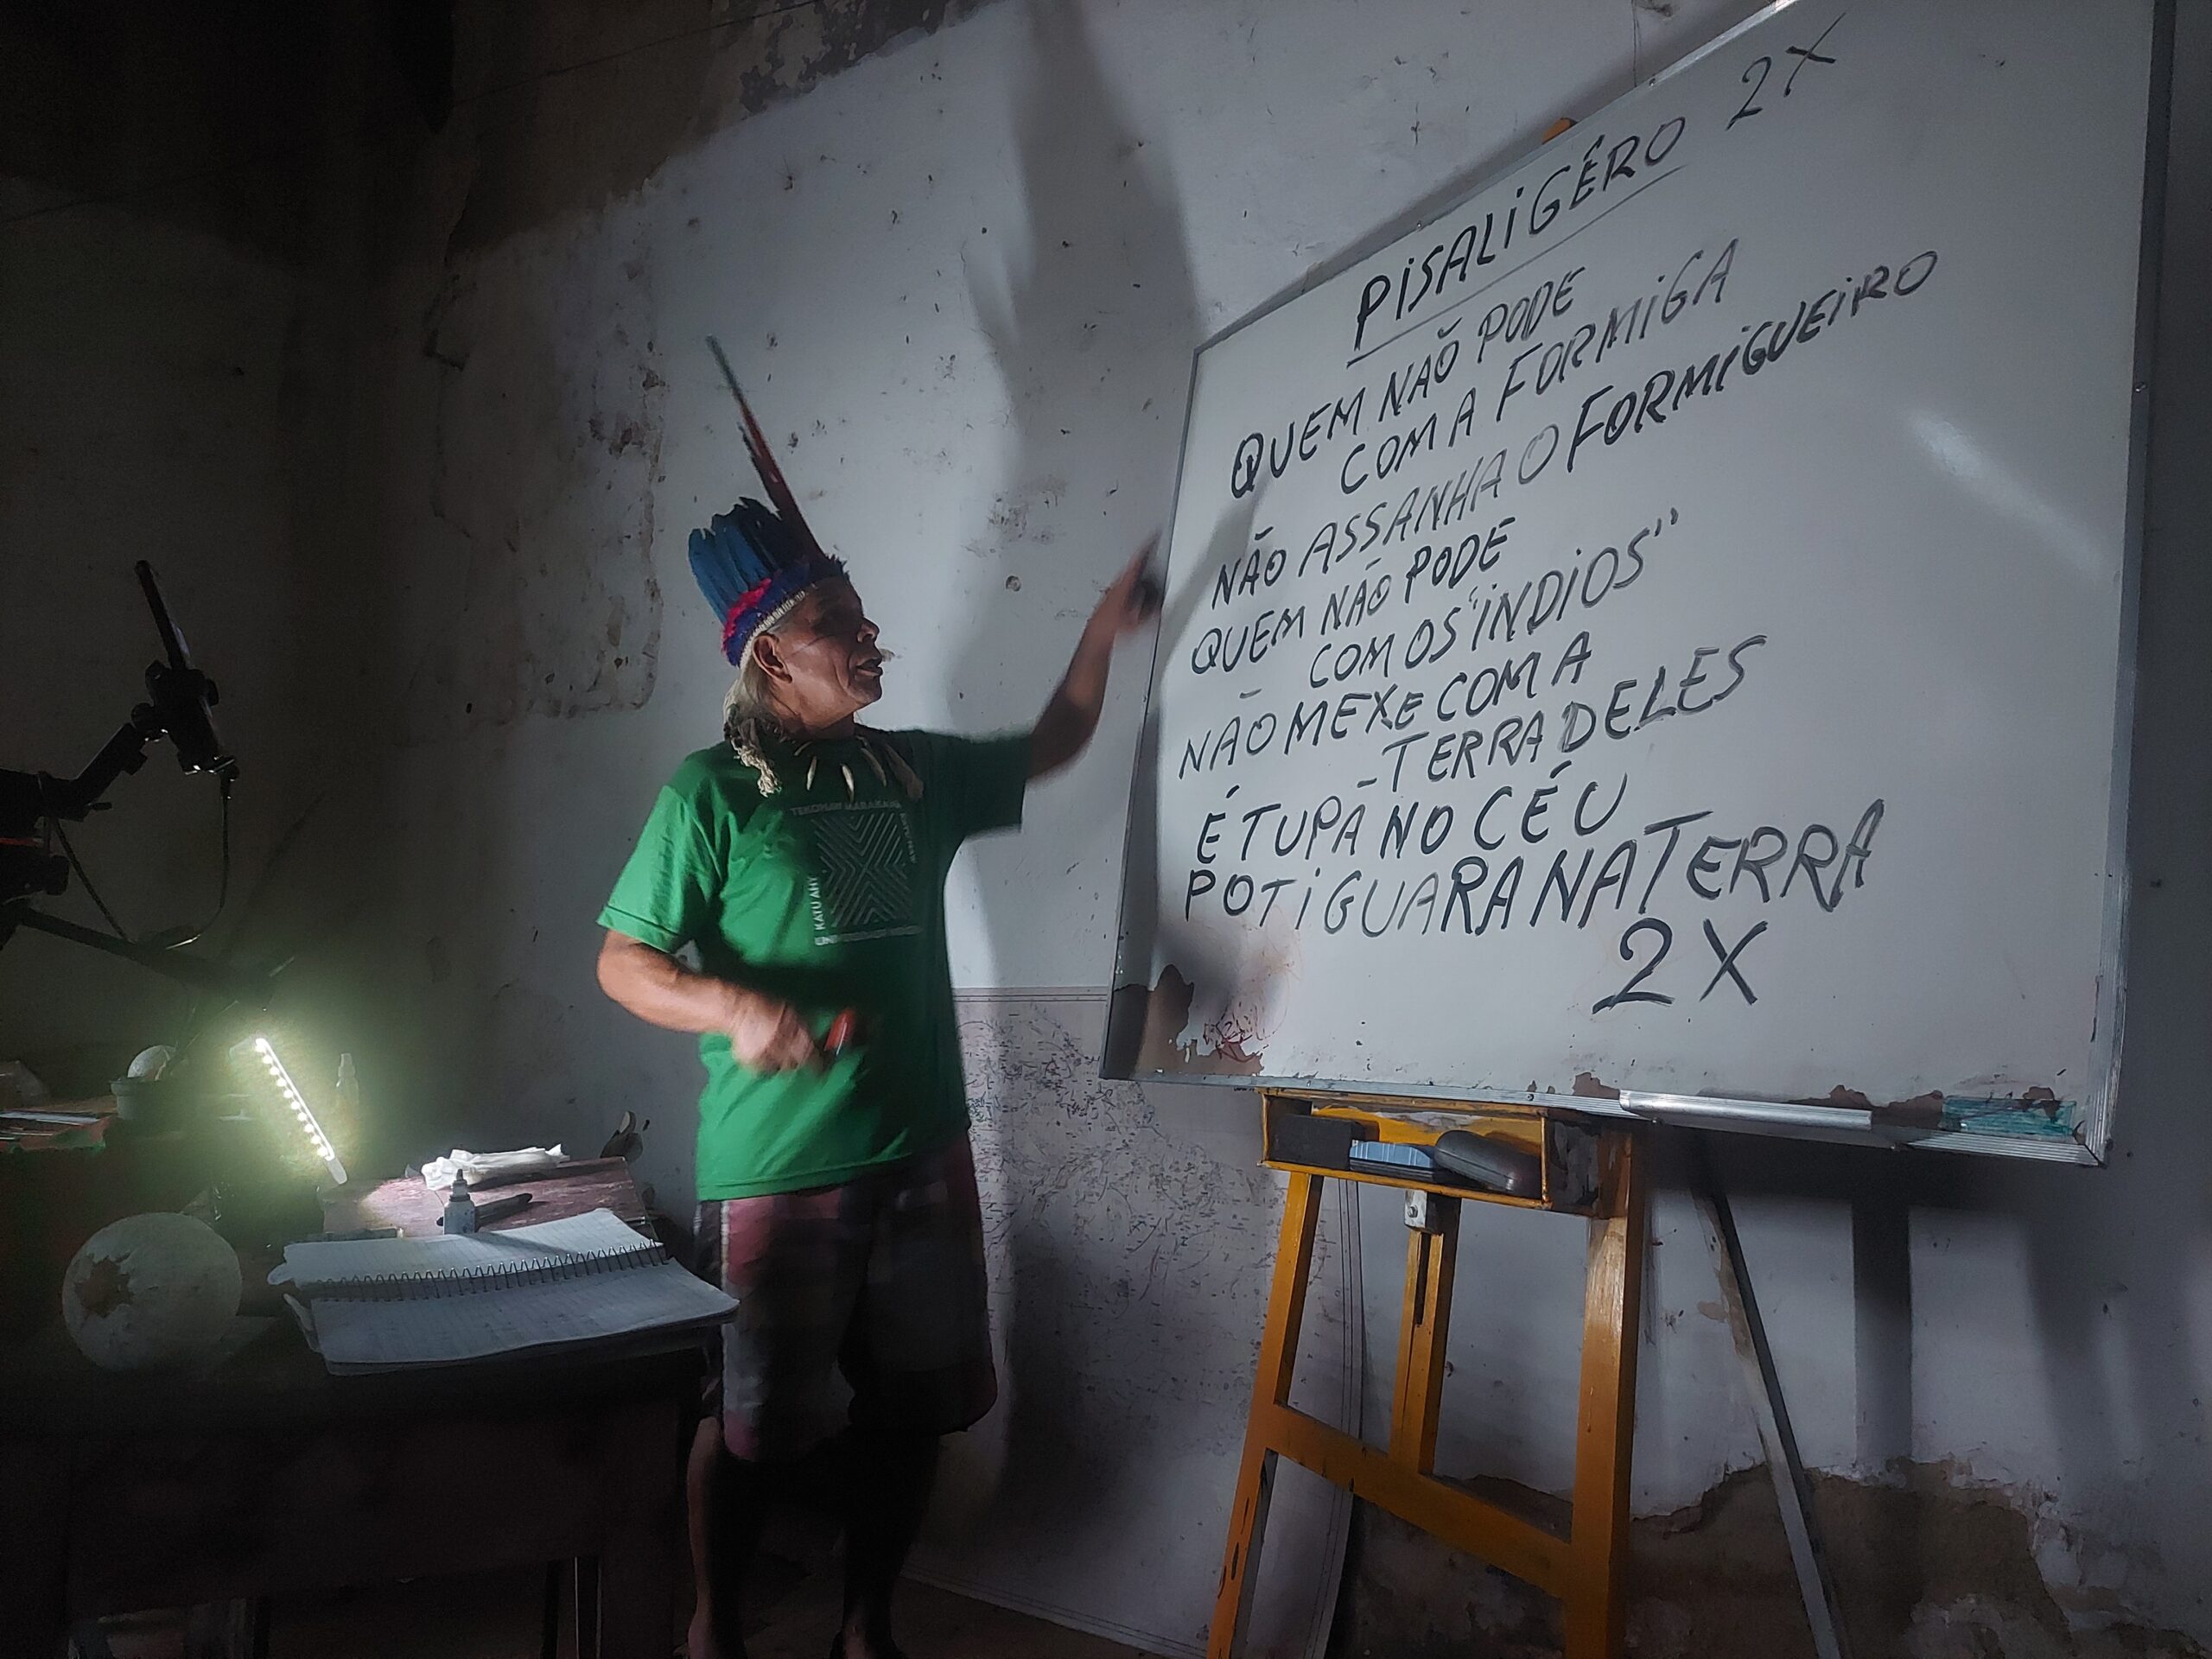 Chief José Urutau is standing in a classroom facing a whiteboard with writing on it and gesturing towards it